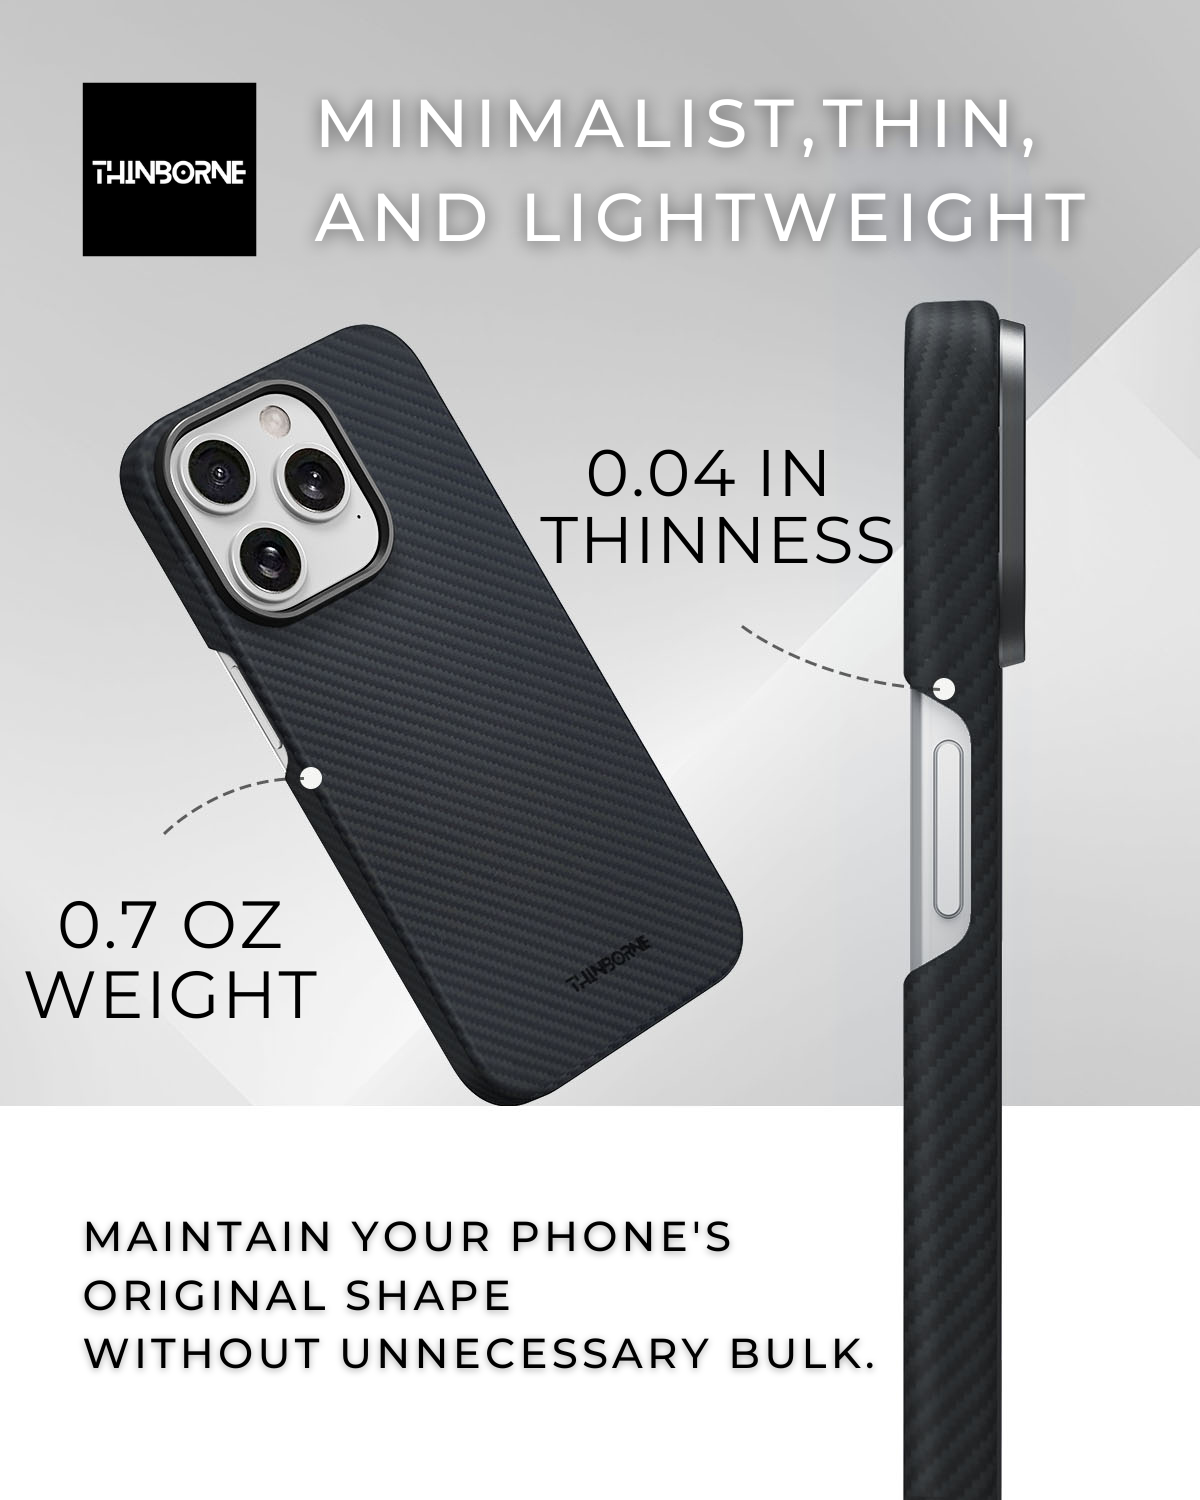 showing the weigh and thinness of the iPhone 15 pro minimalist aramid fiber case